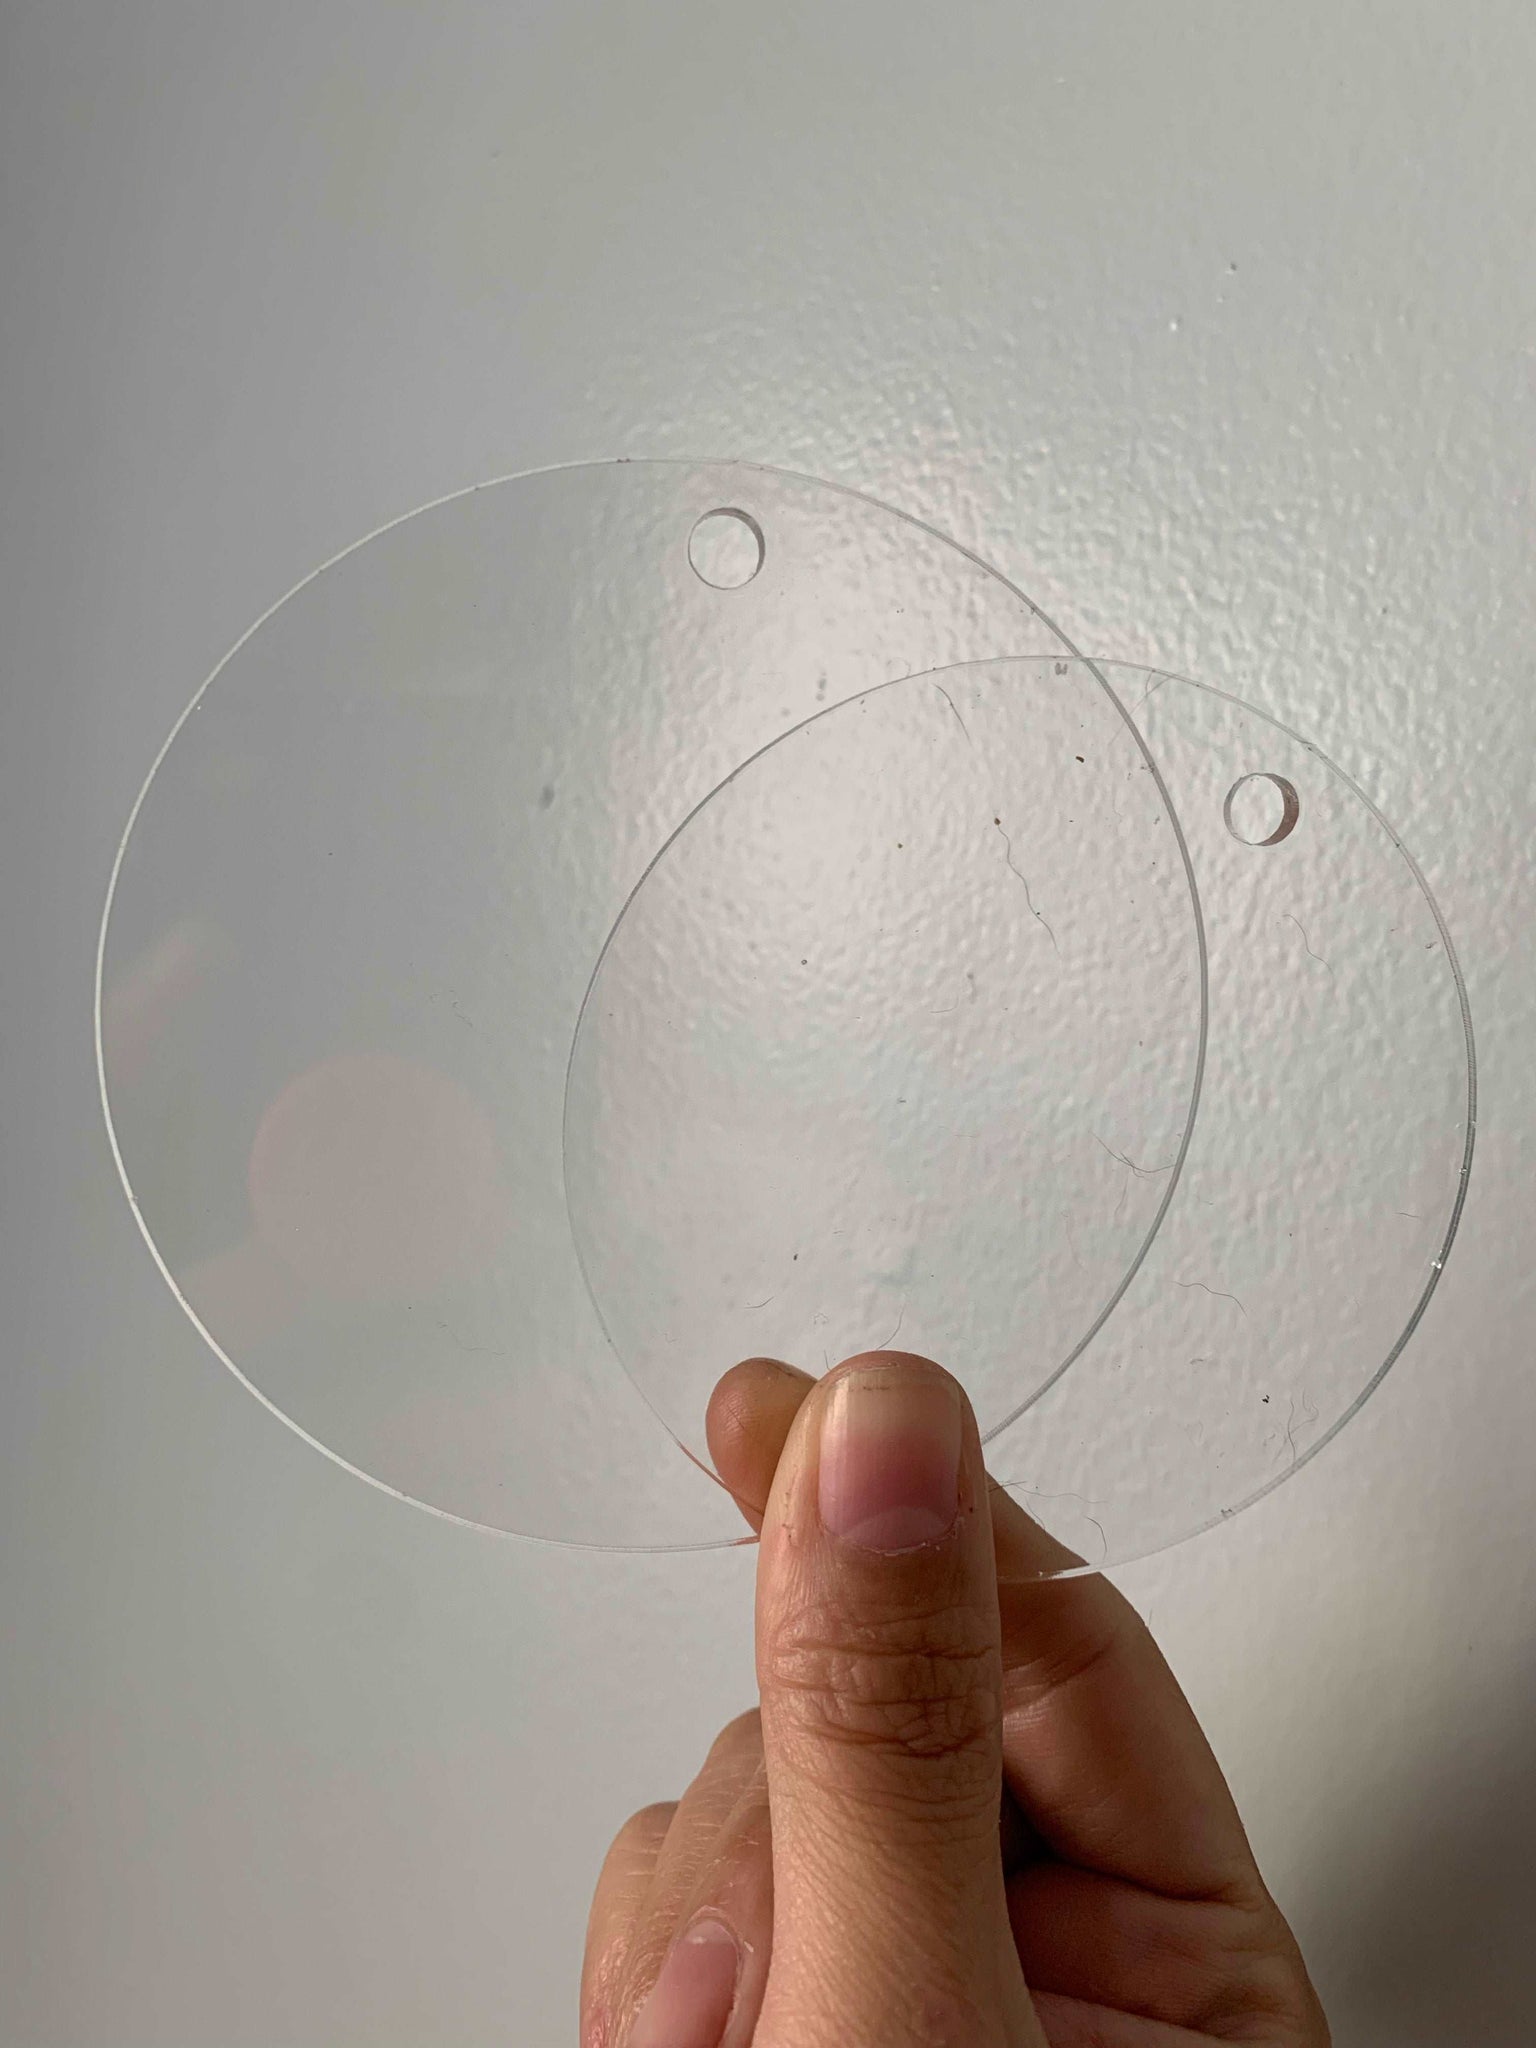 Set of Acrylic Circles with Holes - Beal Creations